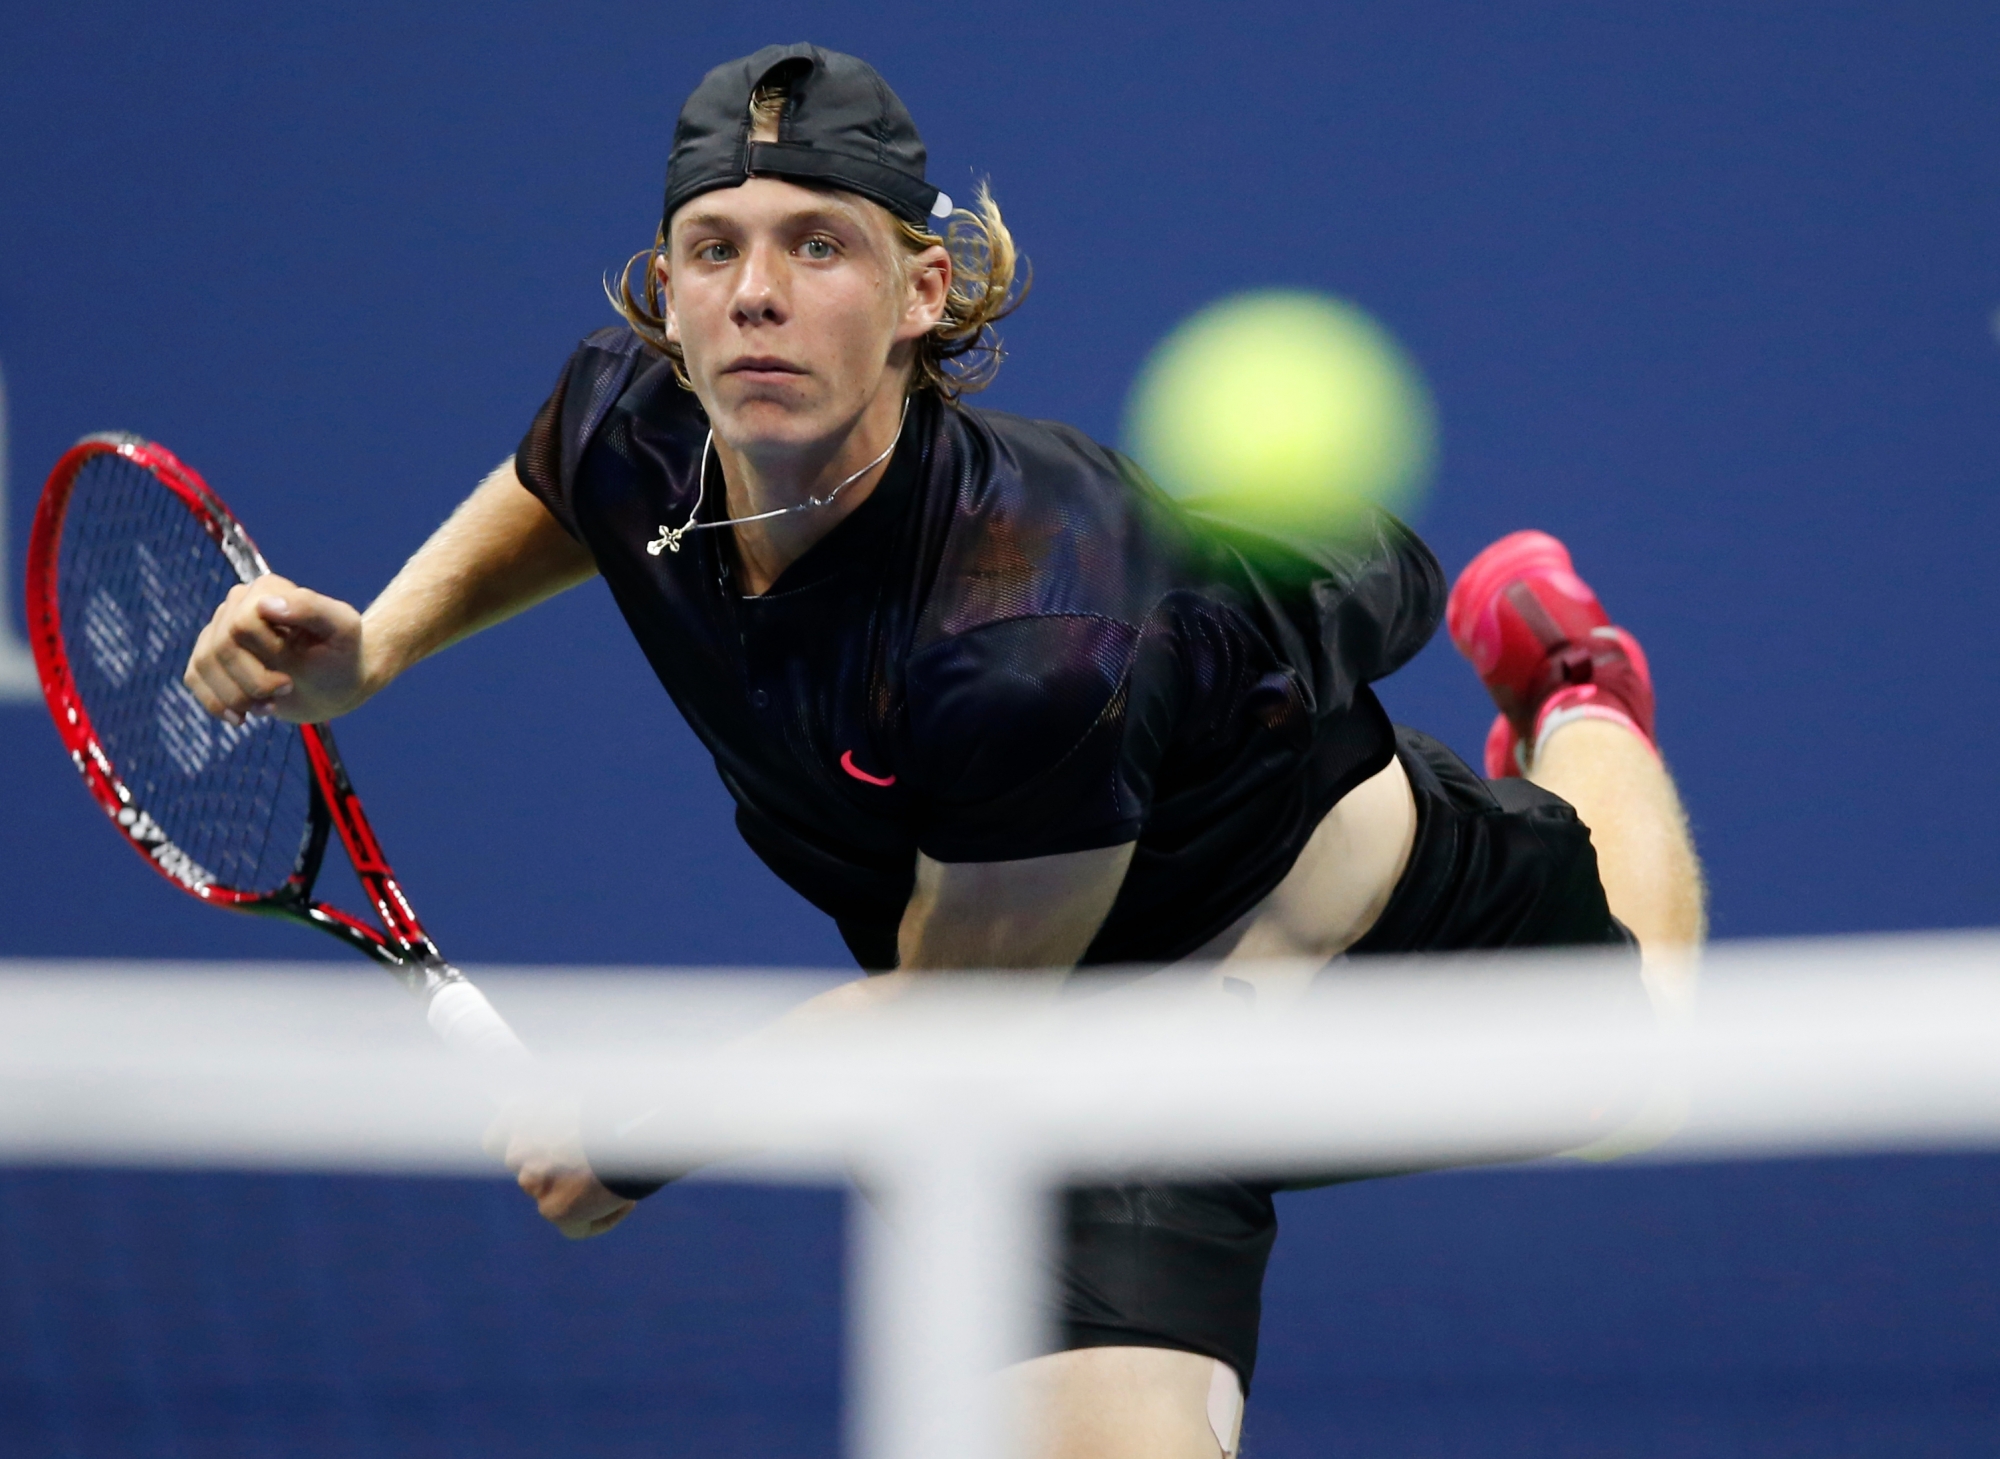 Denis Shapovalov, of Canada, serves to Jo-Wilfried Tsonga, of France, at the U.S. Open tennis tournament in New York, Wednesday, Aug. 30, 2017. (AP Photo/Kathy Willens) US Open Tennis